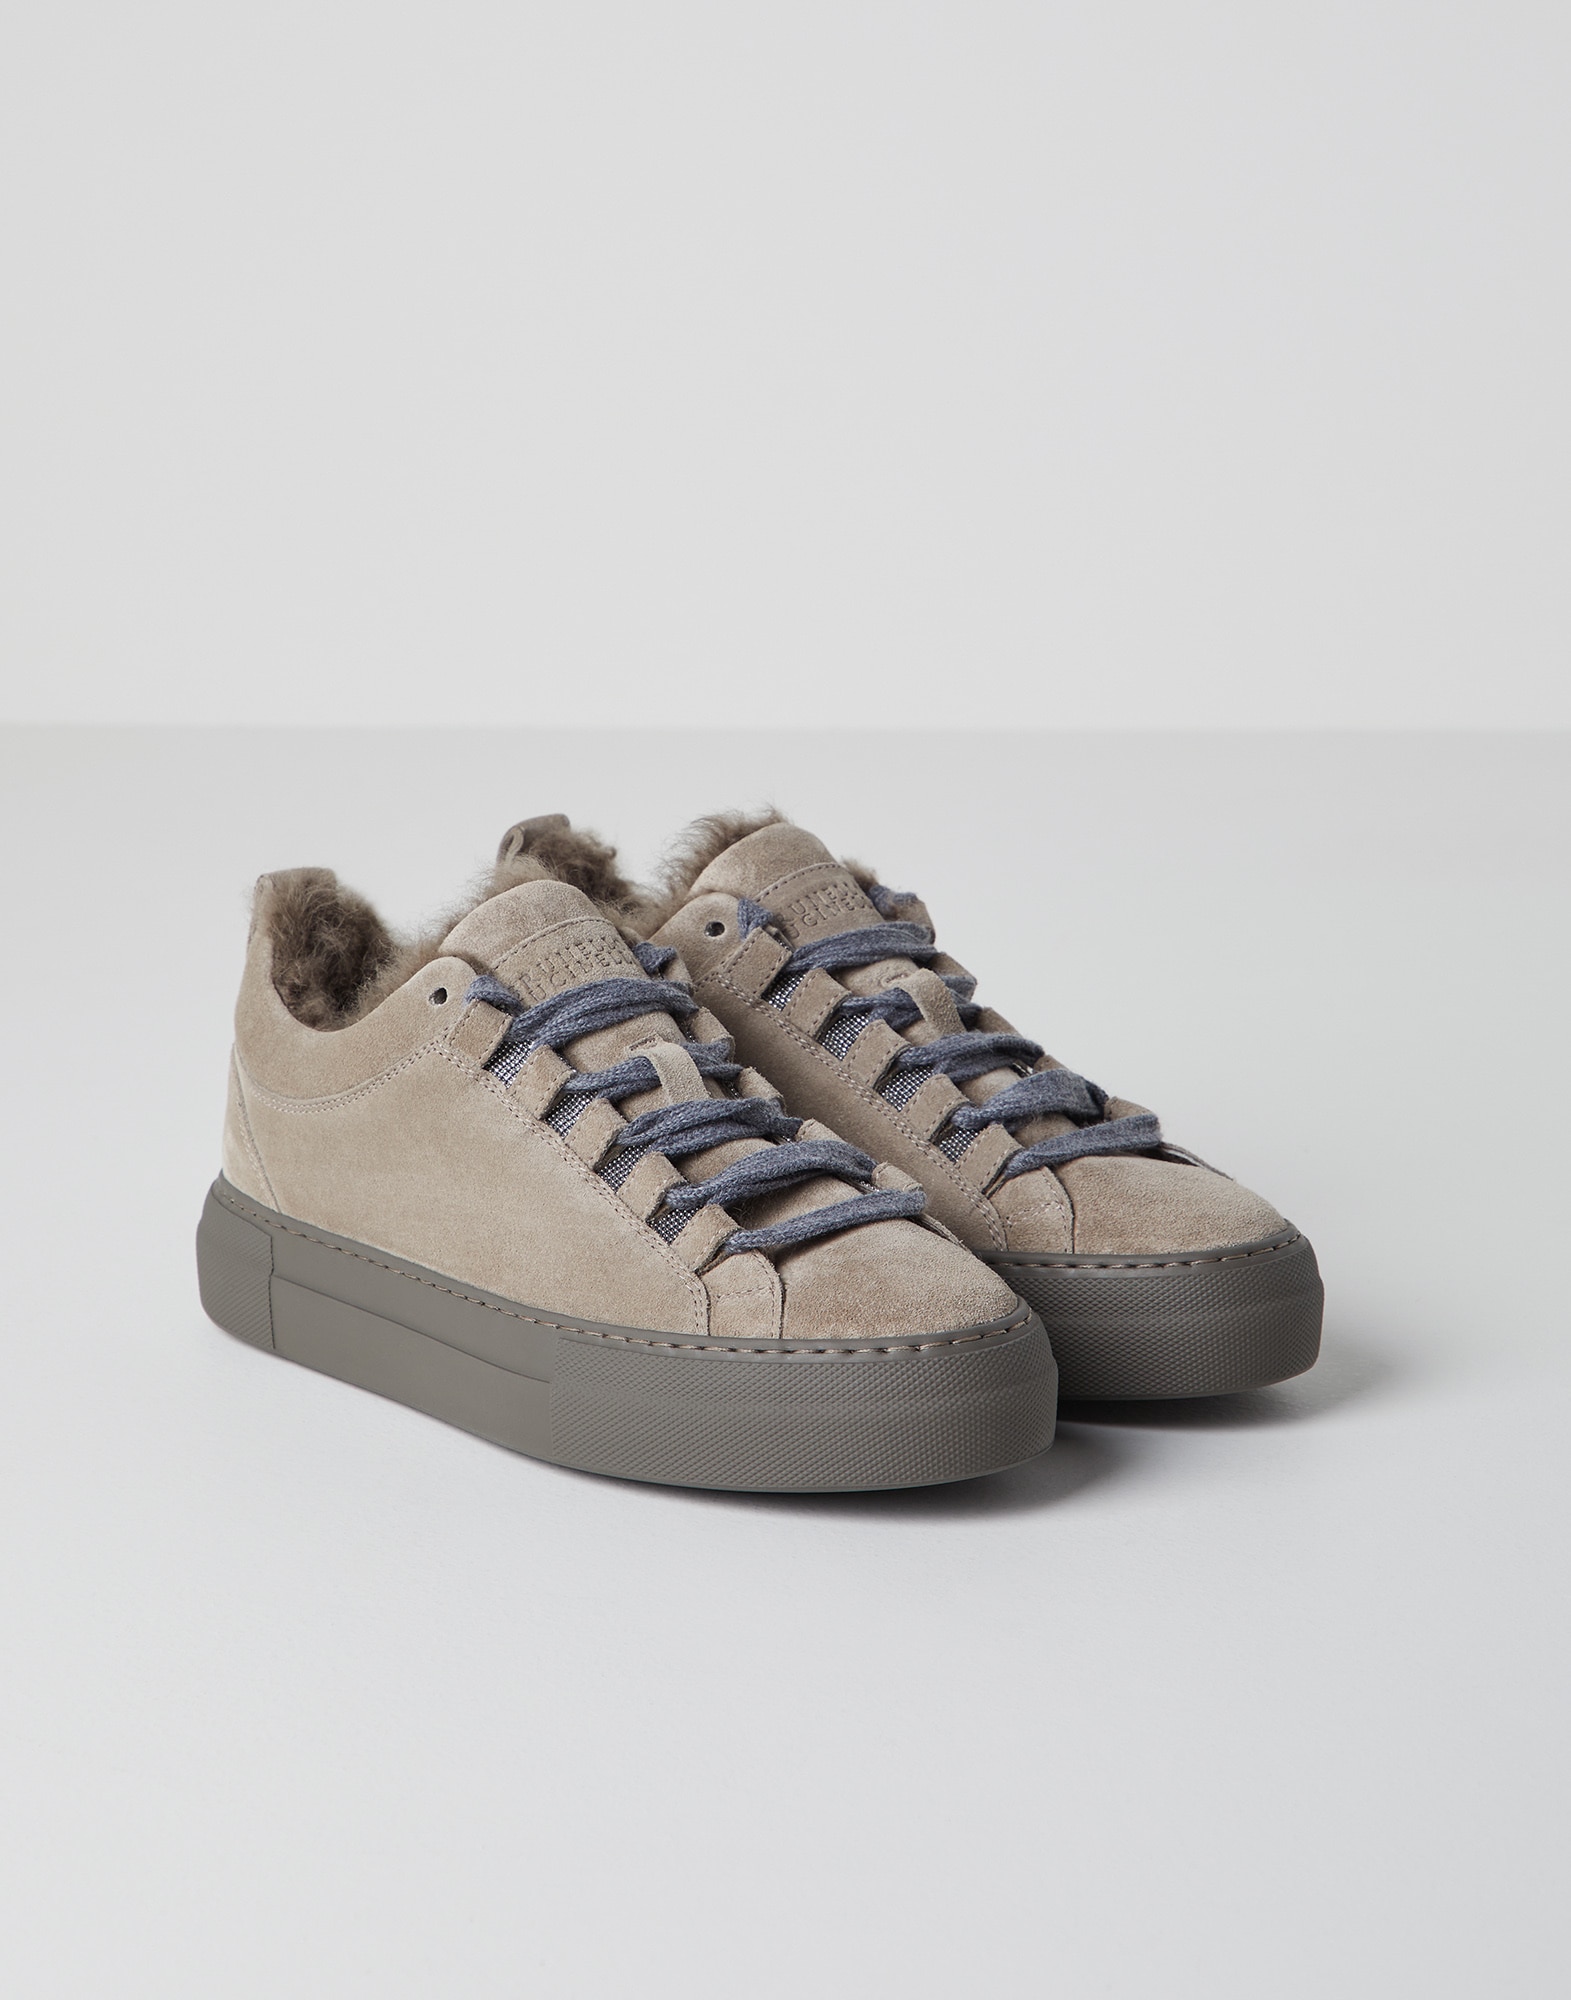 Shearling-lined sneakers